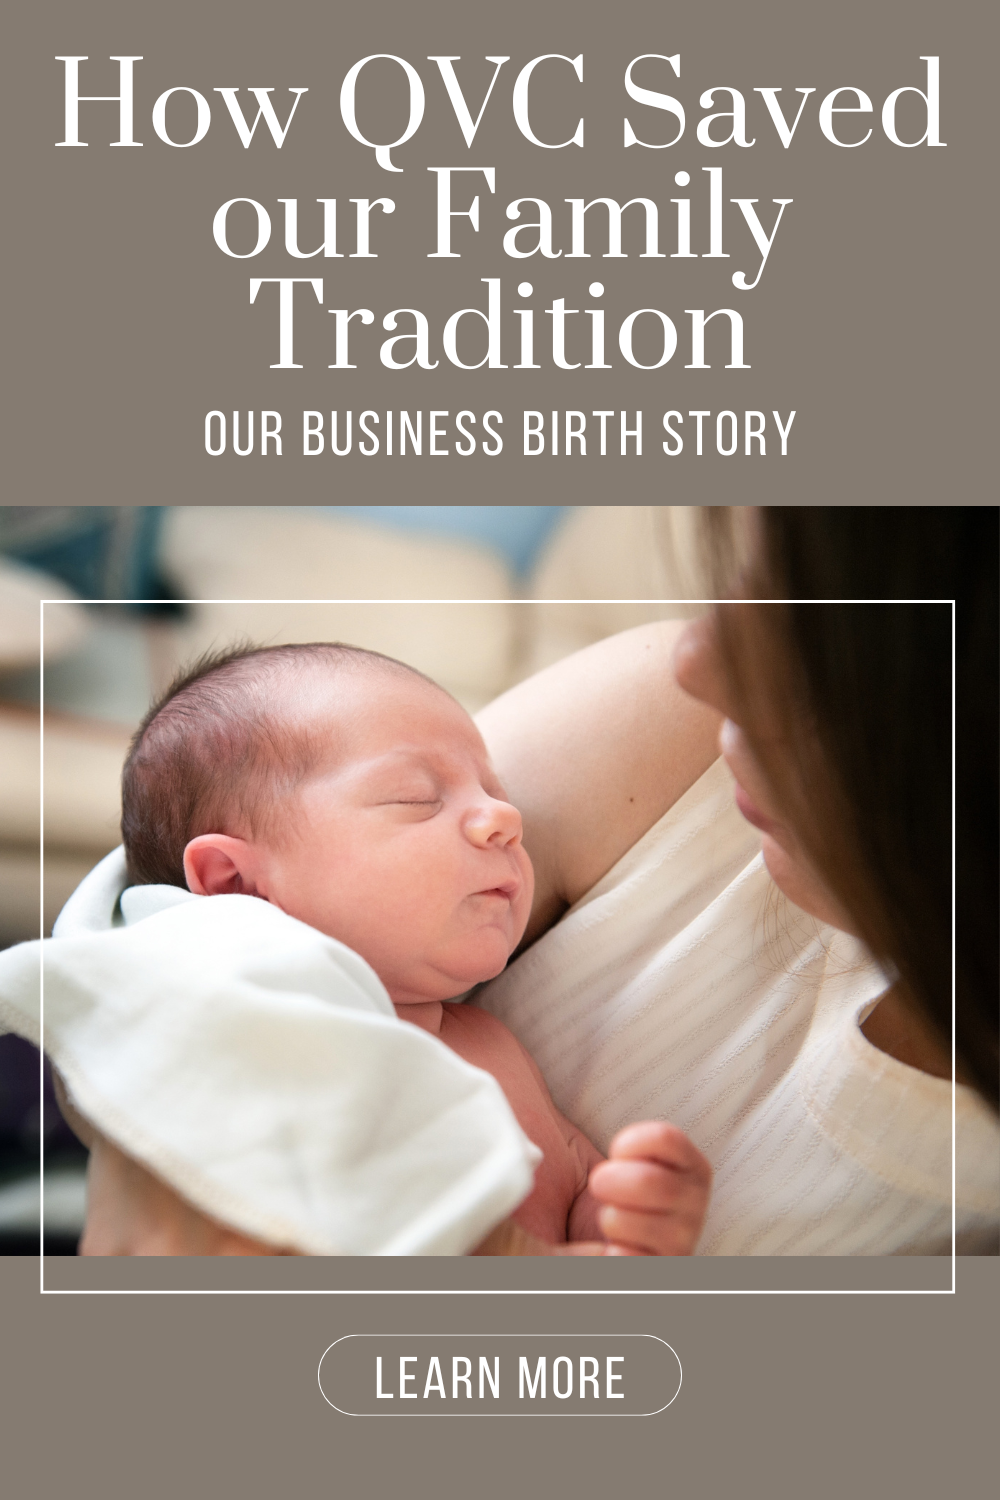 How QVC Saved our Family Tradition | Our Business Birth Story